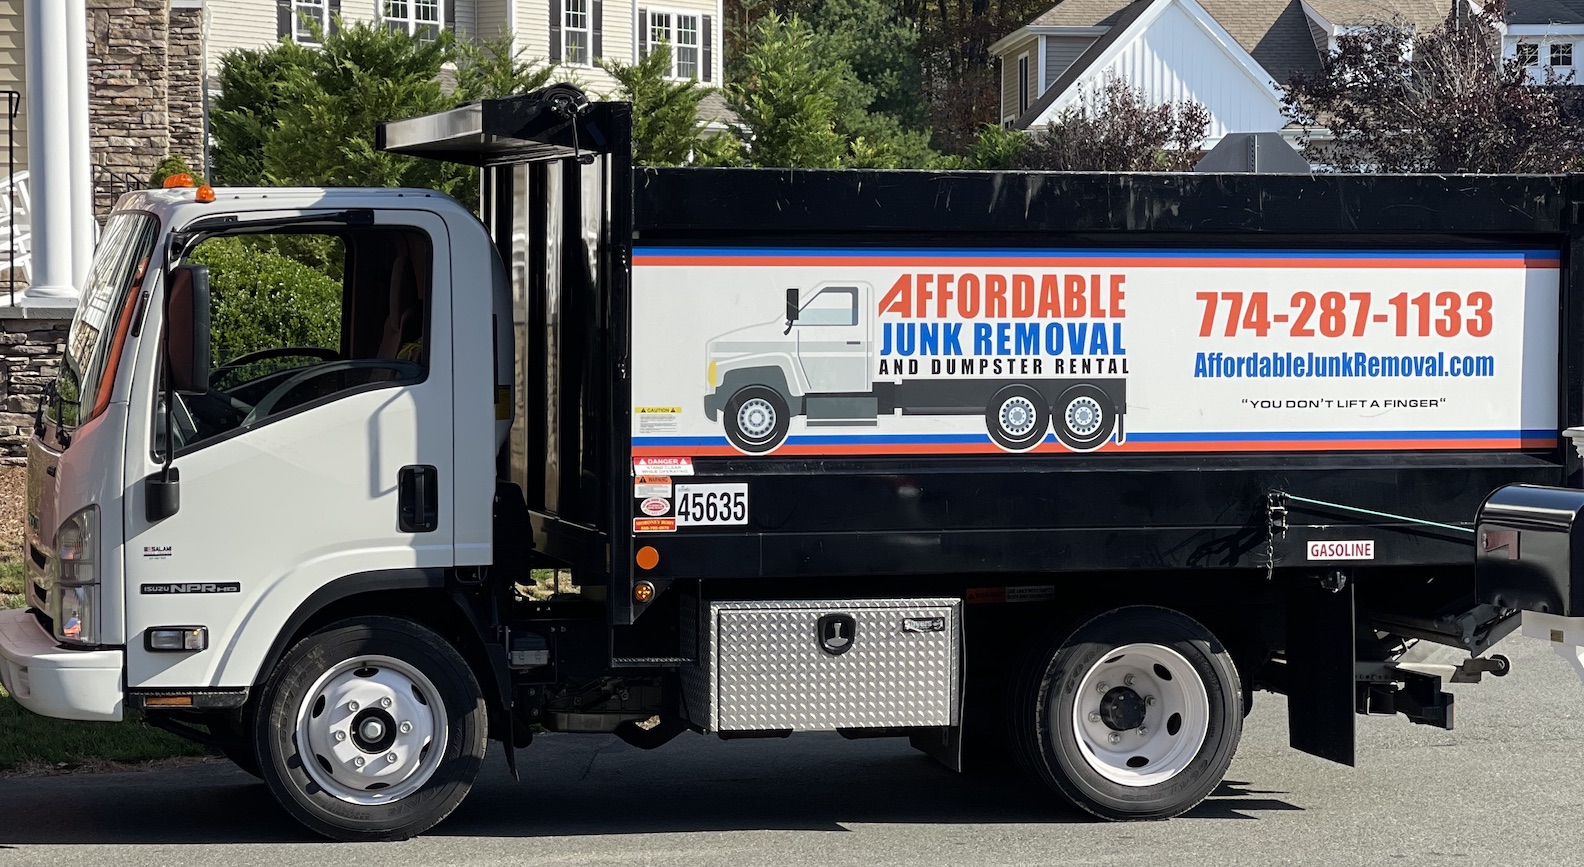 Business Profile: Family-run Affordable Junk Removal takes stress out of clean-outs